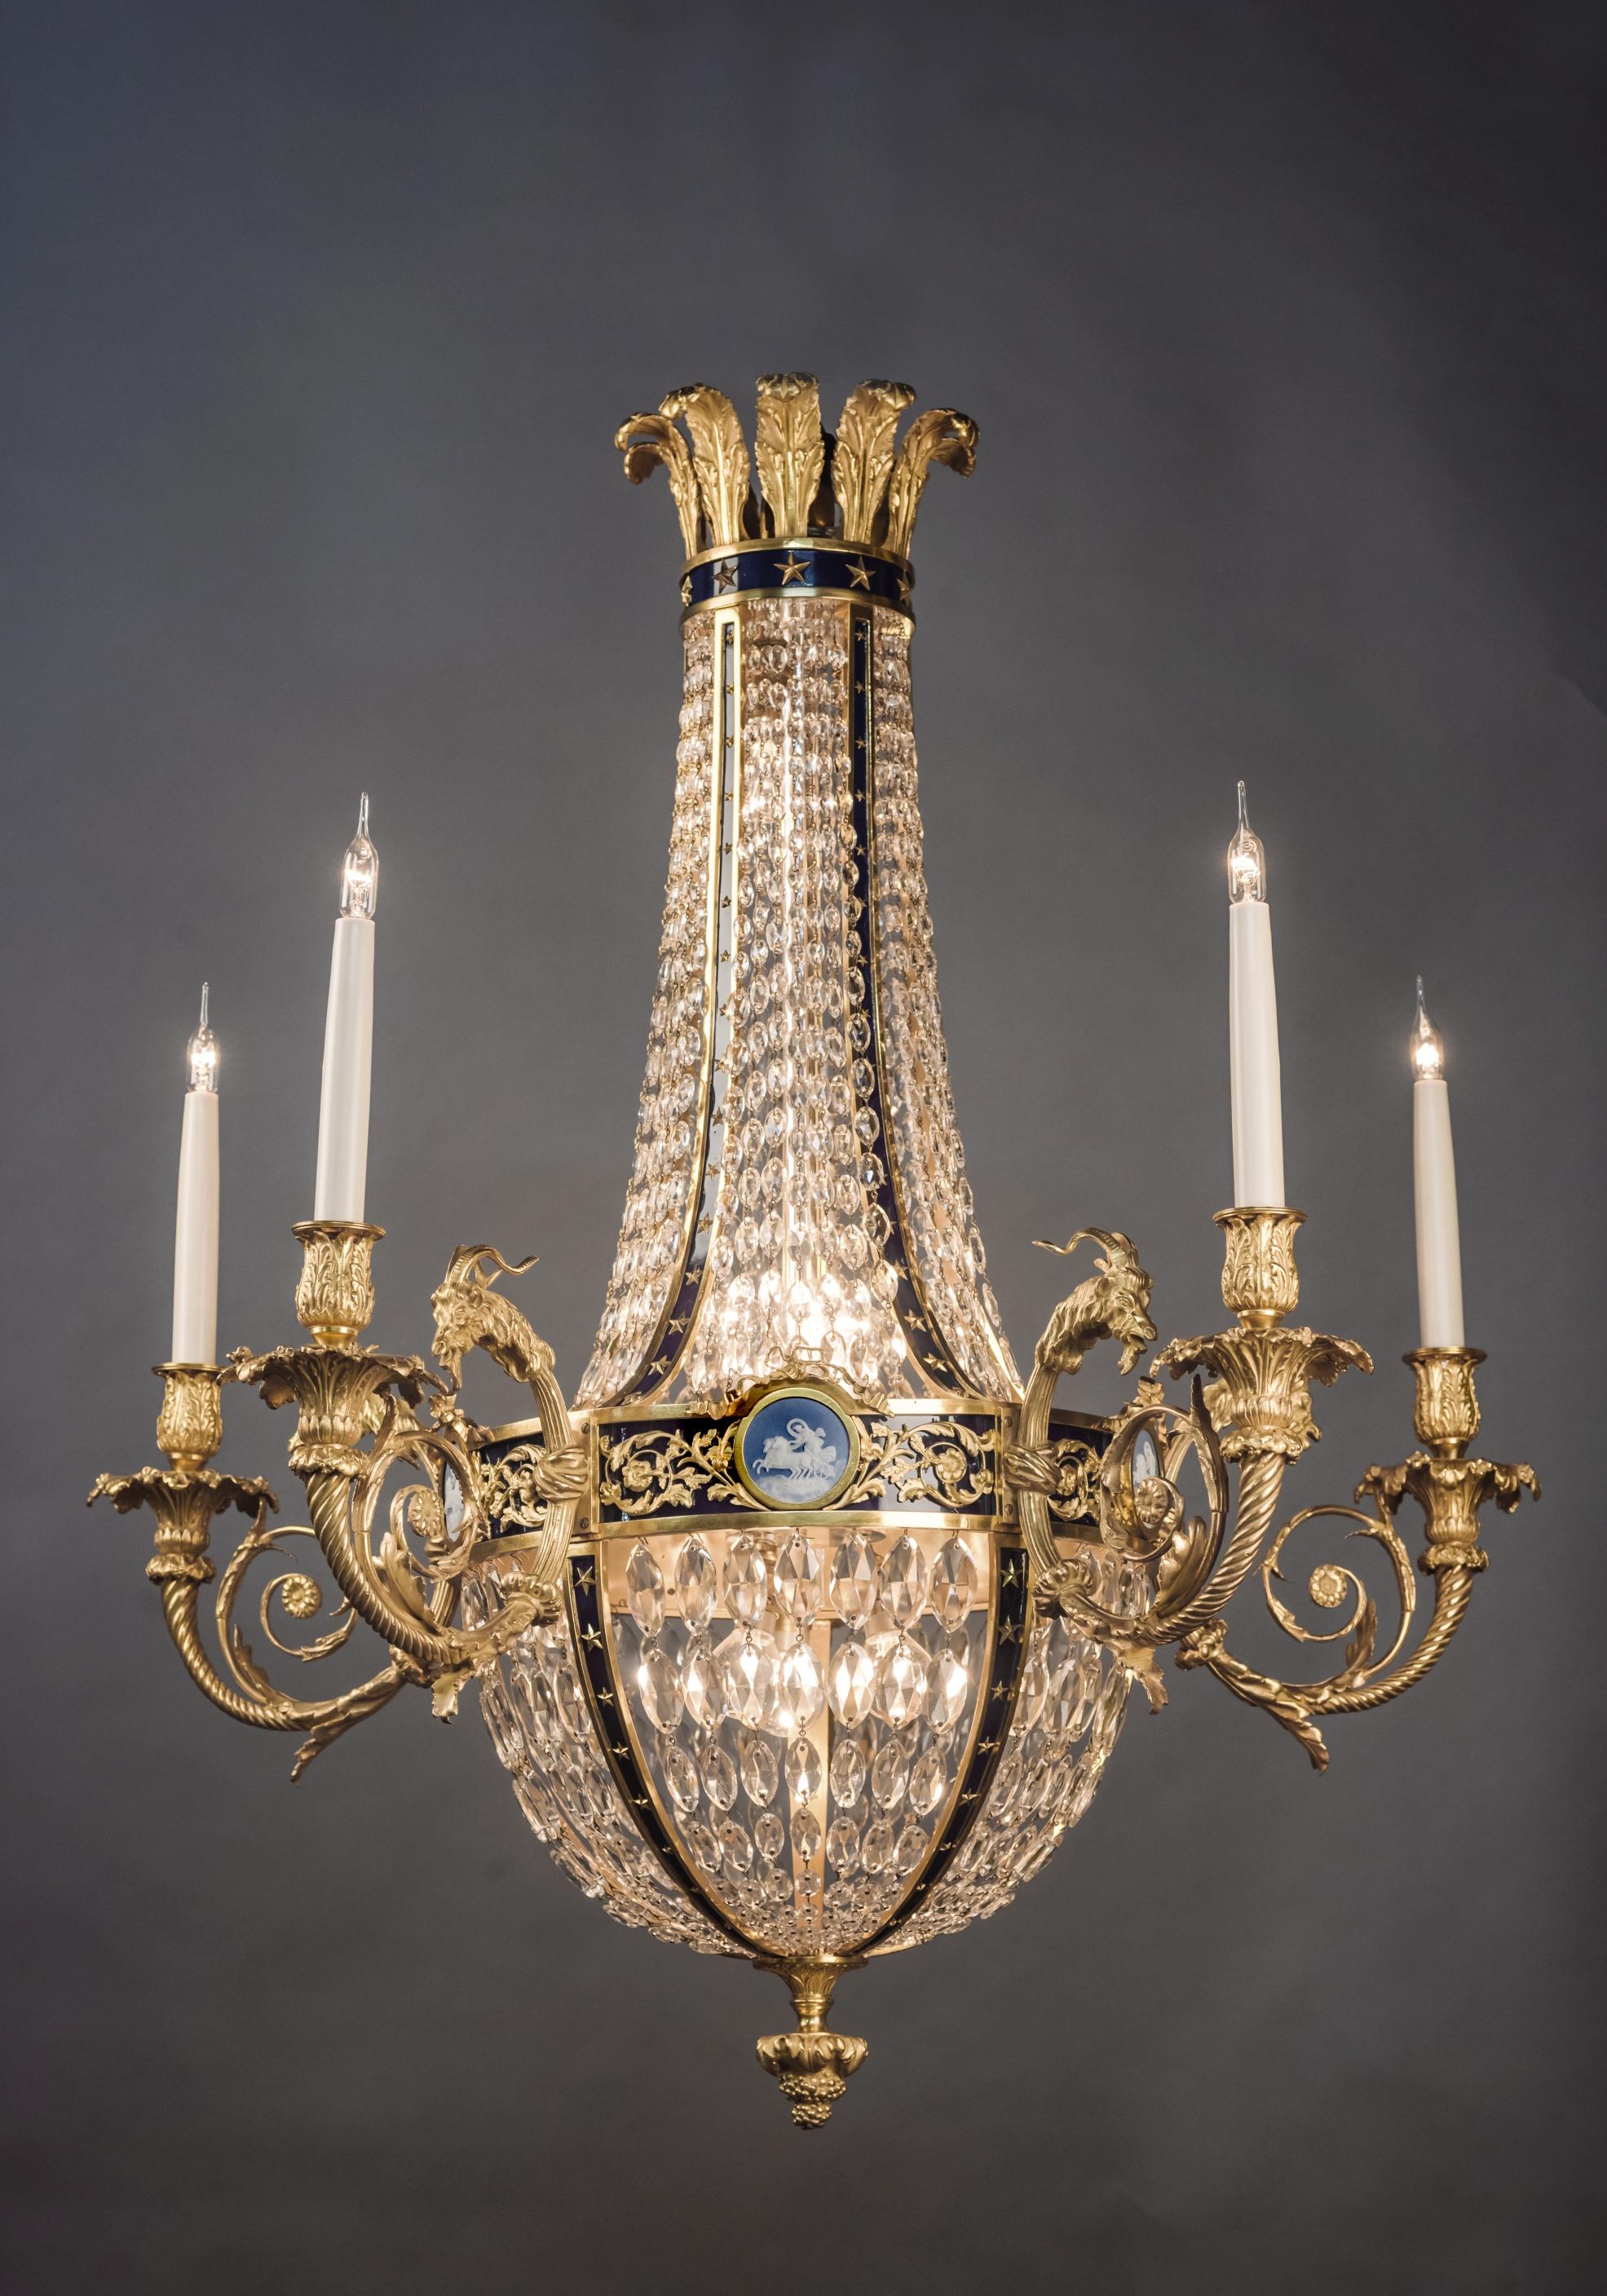 A Louis XVI style gilt bronze and cut-glass basket chandelier with jasperware plaques, in the manner of Pierre Gouthière.

French, circa 1900. 

The chandelier has five external and nine internal light fitments. 

This fine chandelier has a